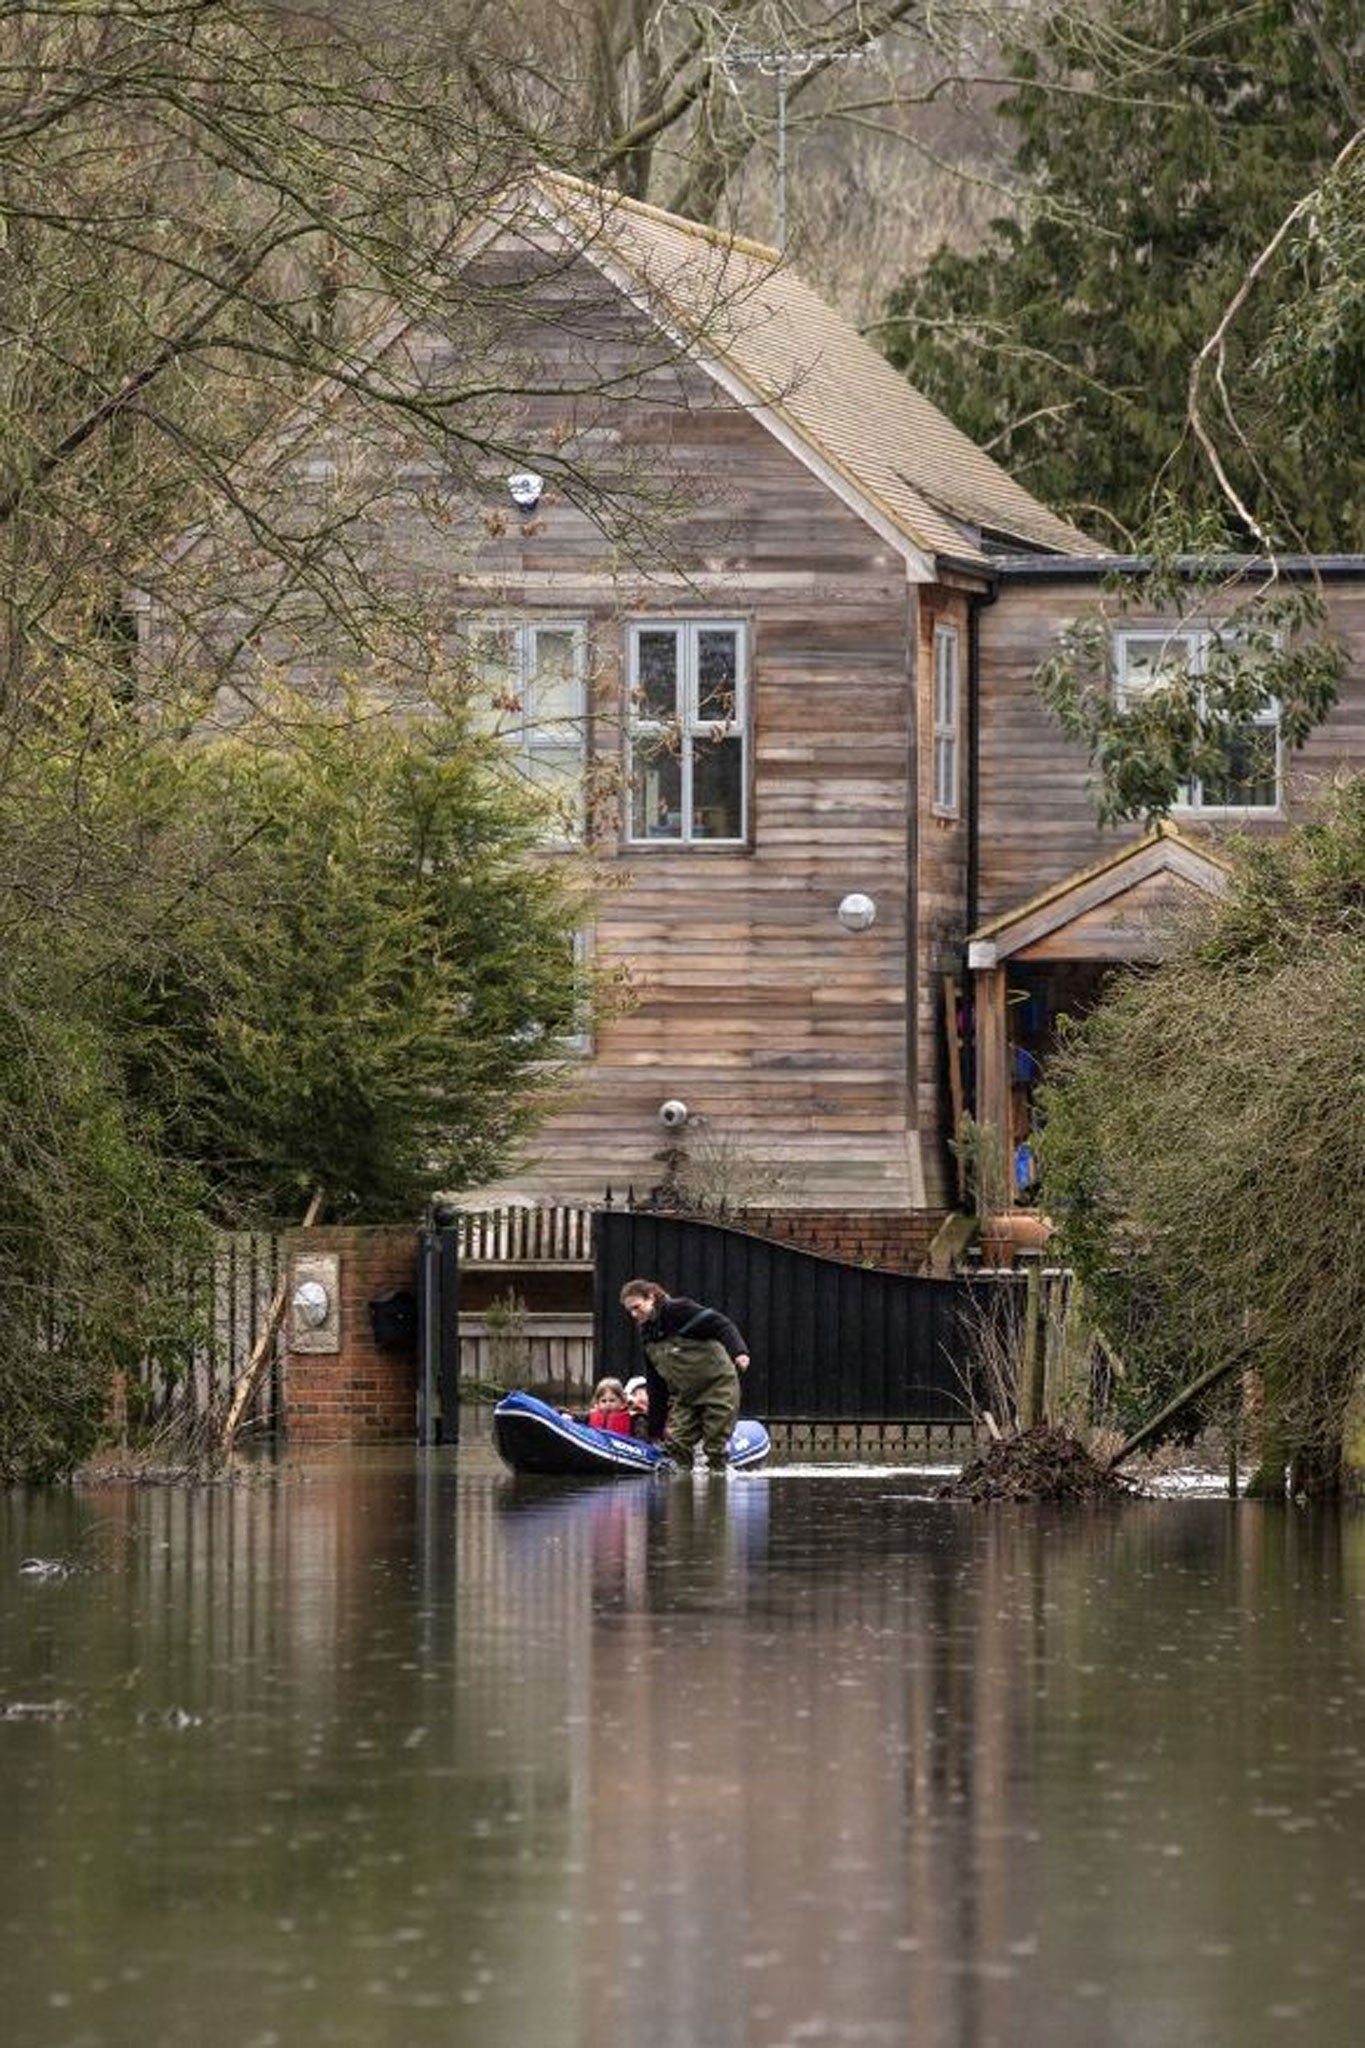 Manning the lifeboat: beware of the cost if lenders come to your financial rescue after the floods